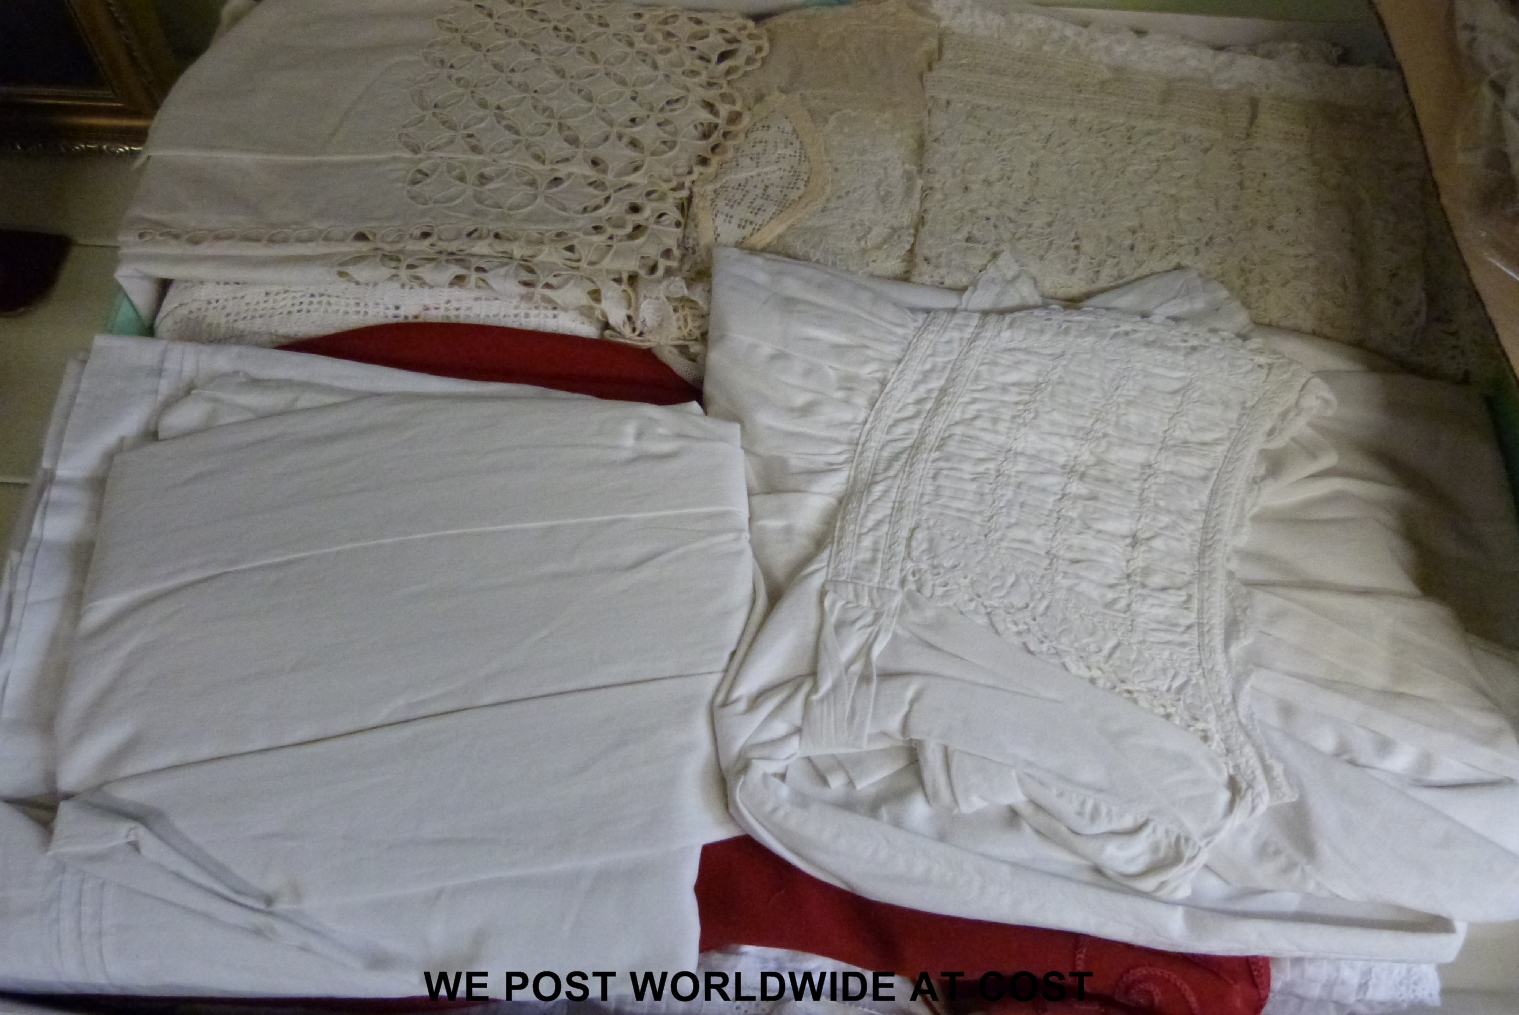 A very good collection of christening gowns, hand-made lace, Victorian baby clothes etc